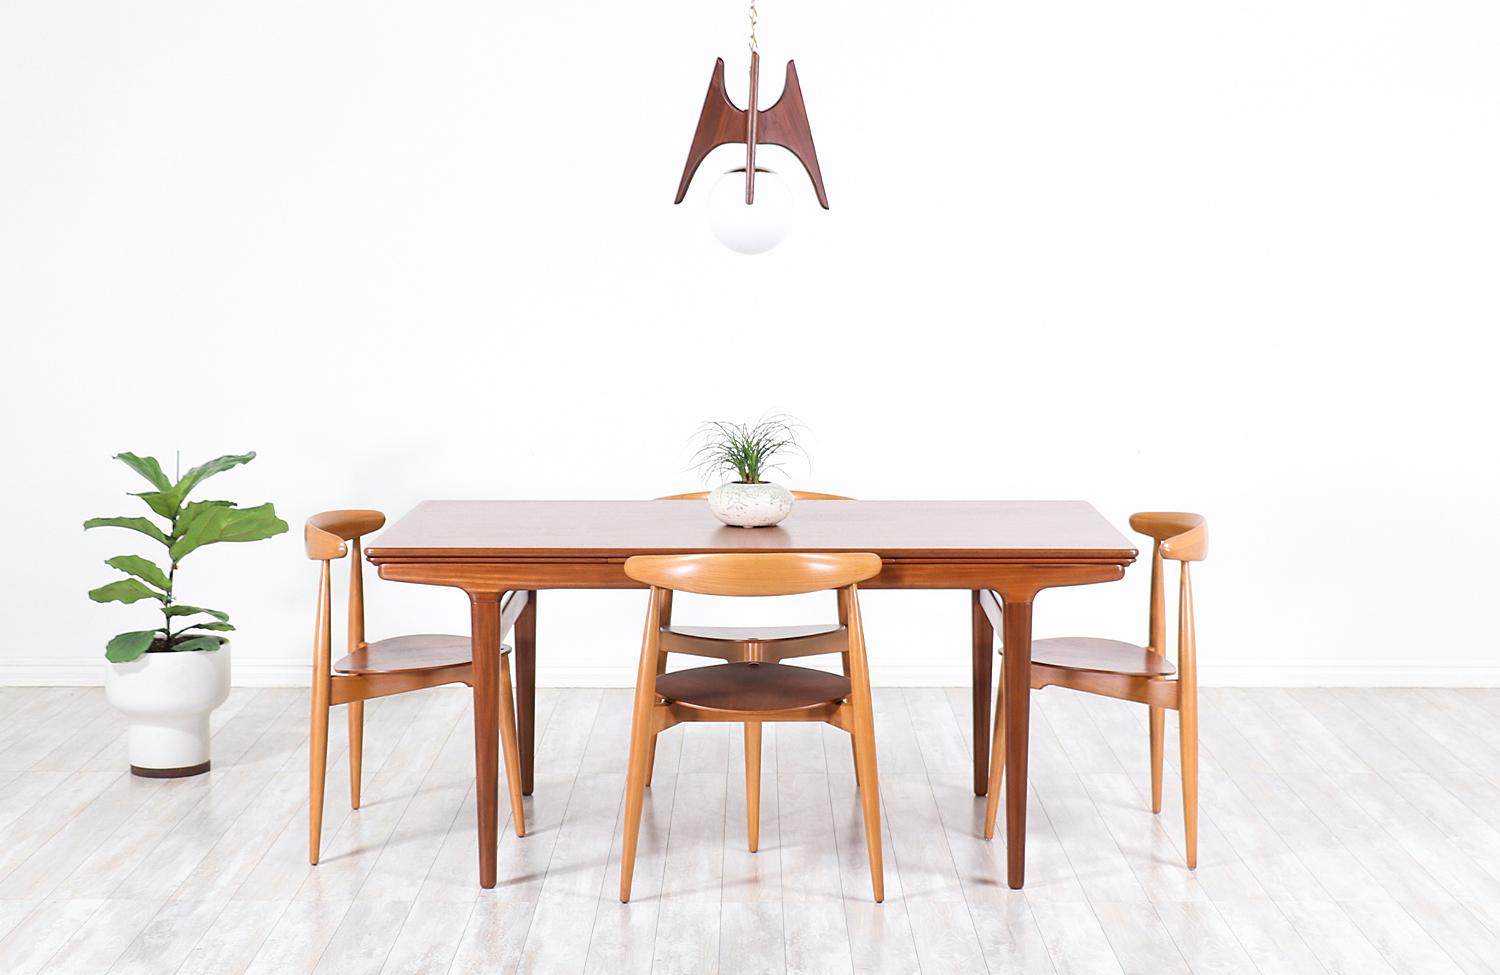 Stylish Danish modern draw-leaf dining table by Danish furniture designer Johannes Andersen and manufactured by Uldum Møbelfabrik, circa 1960s. This versatile table design features a solid teak wood body with a rectangular top and angled tapered